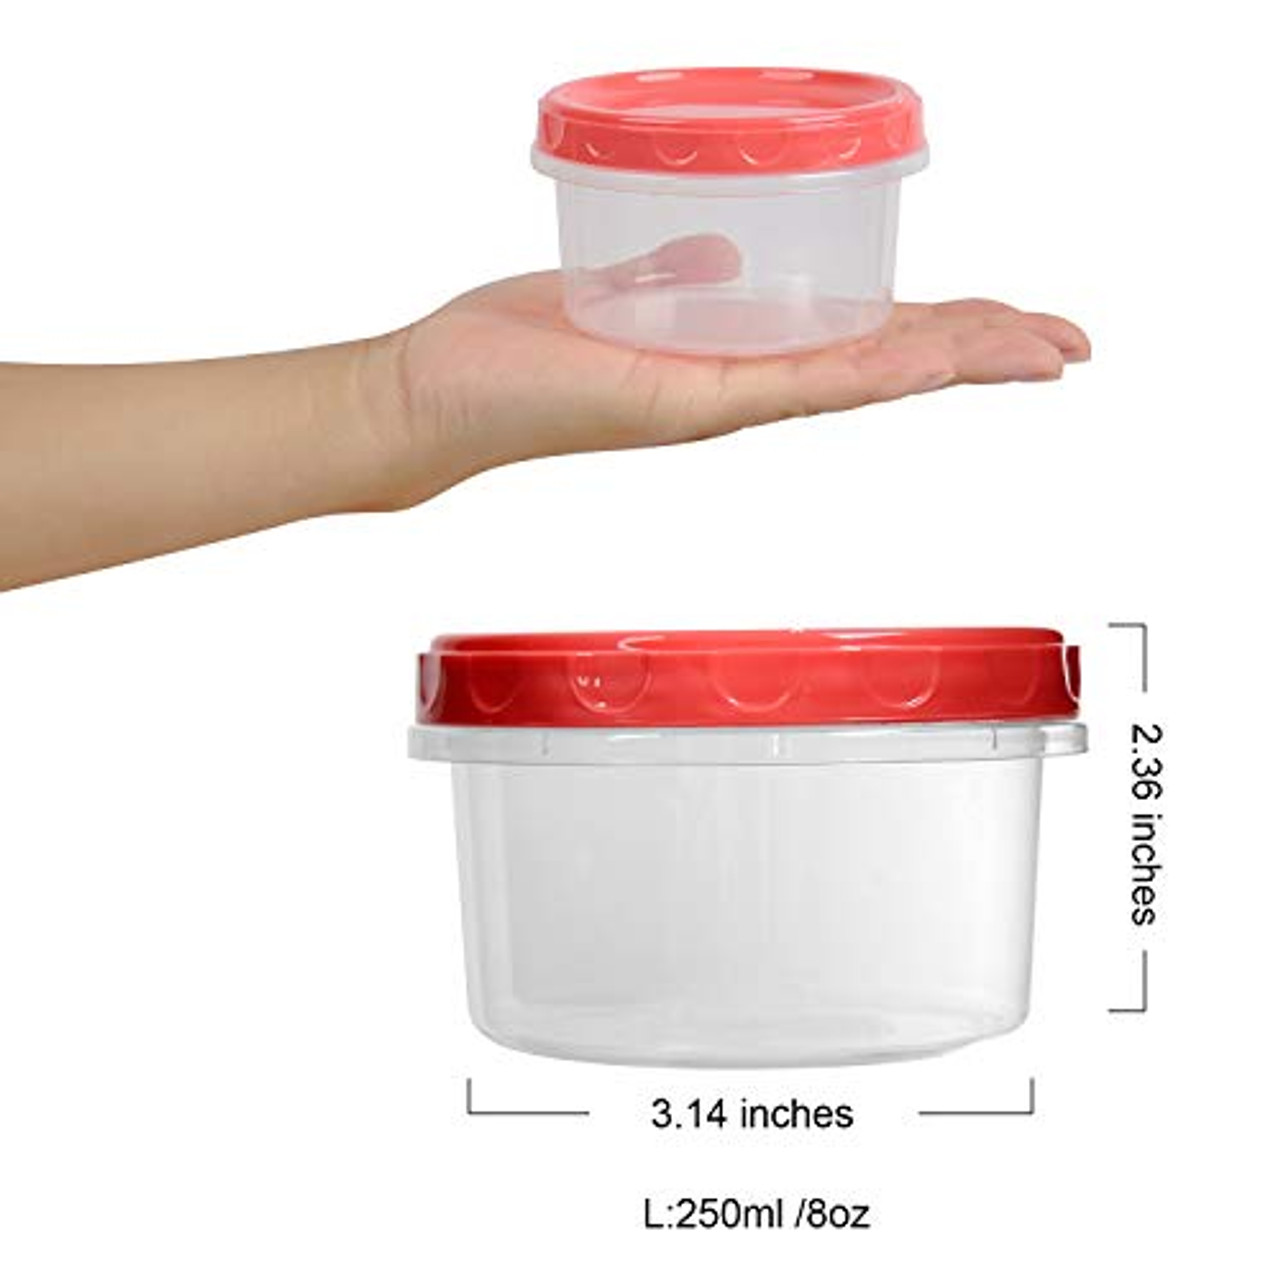 Glad Freezerware 8 Small Containers S With Lids BPA Free Freezer Ware 2  Packs